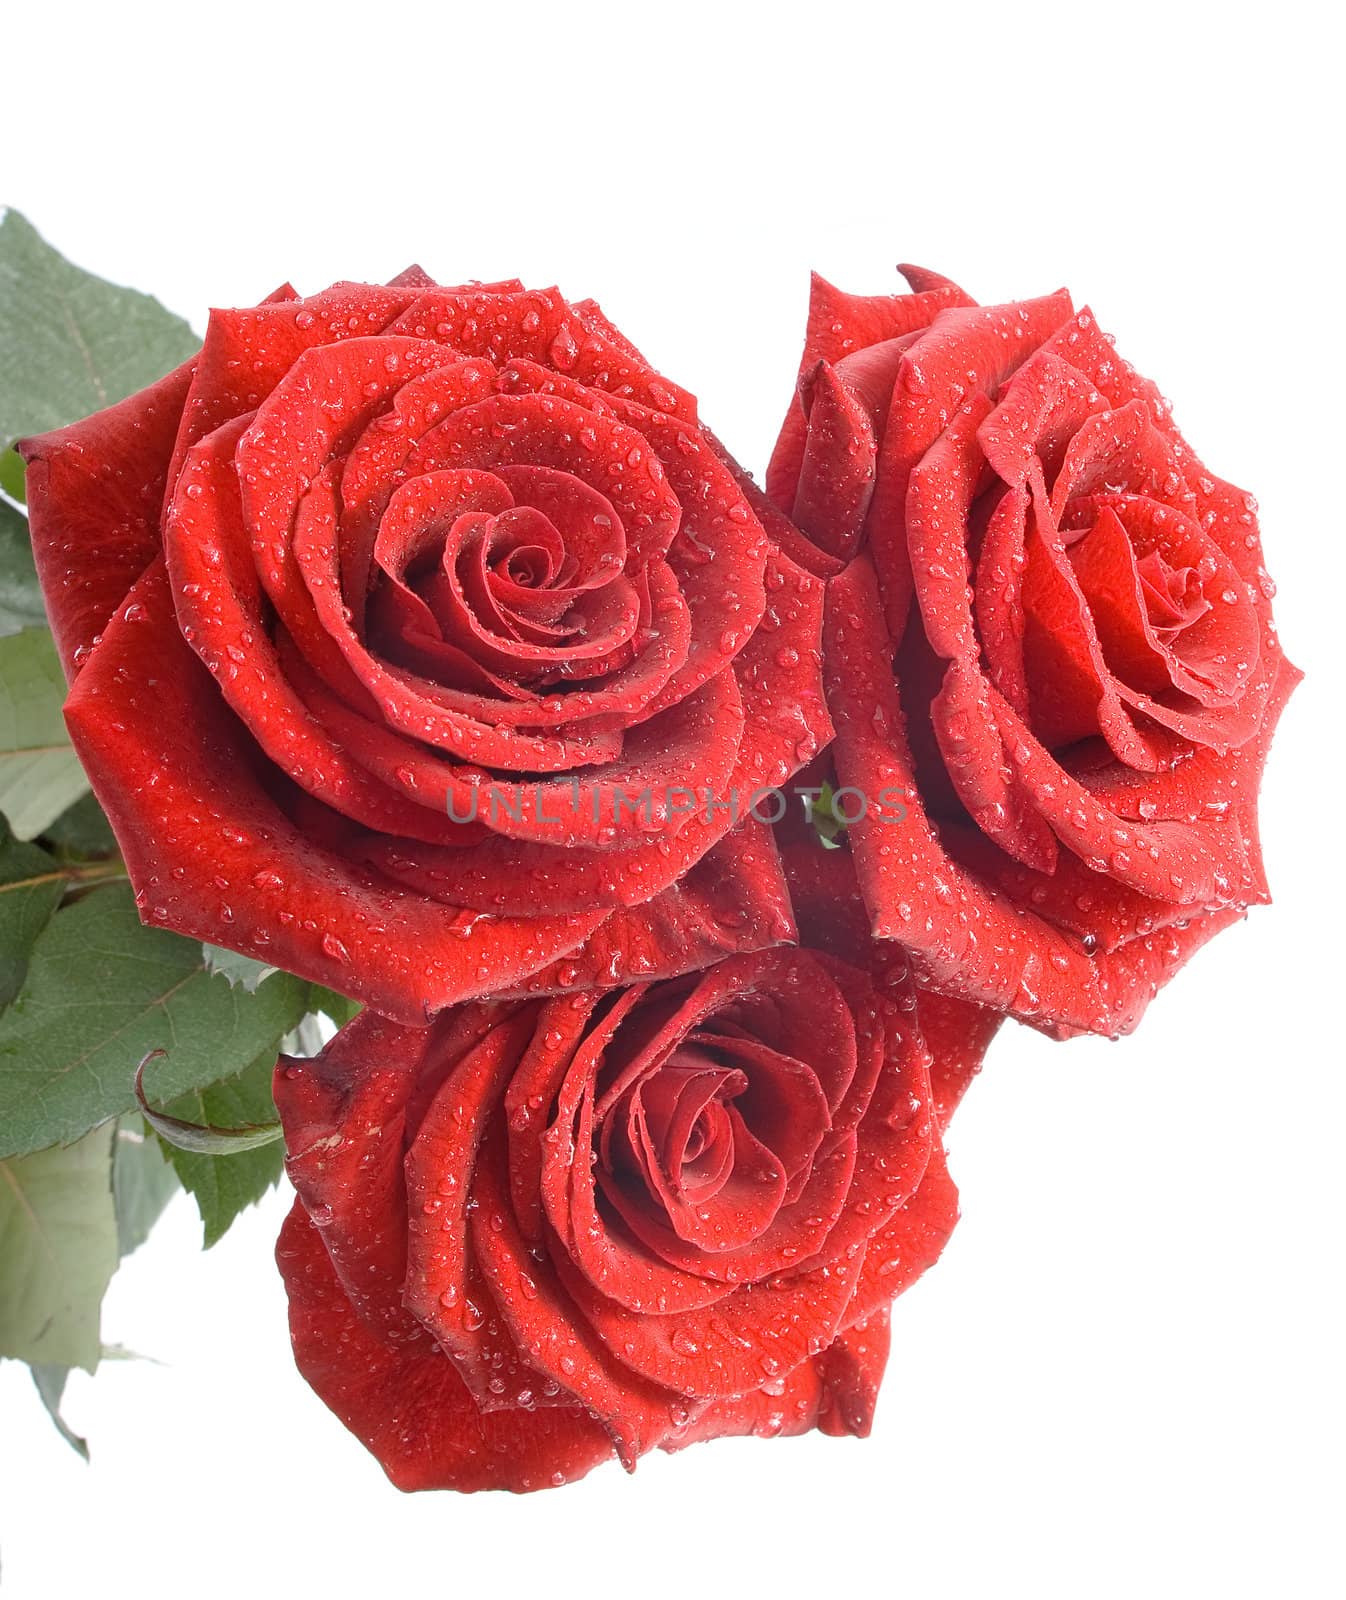 Three red roses on the white background